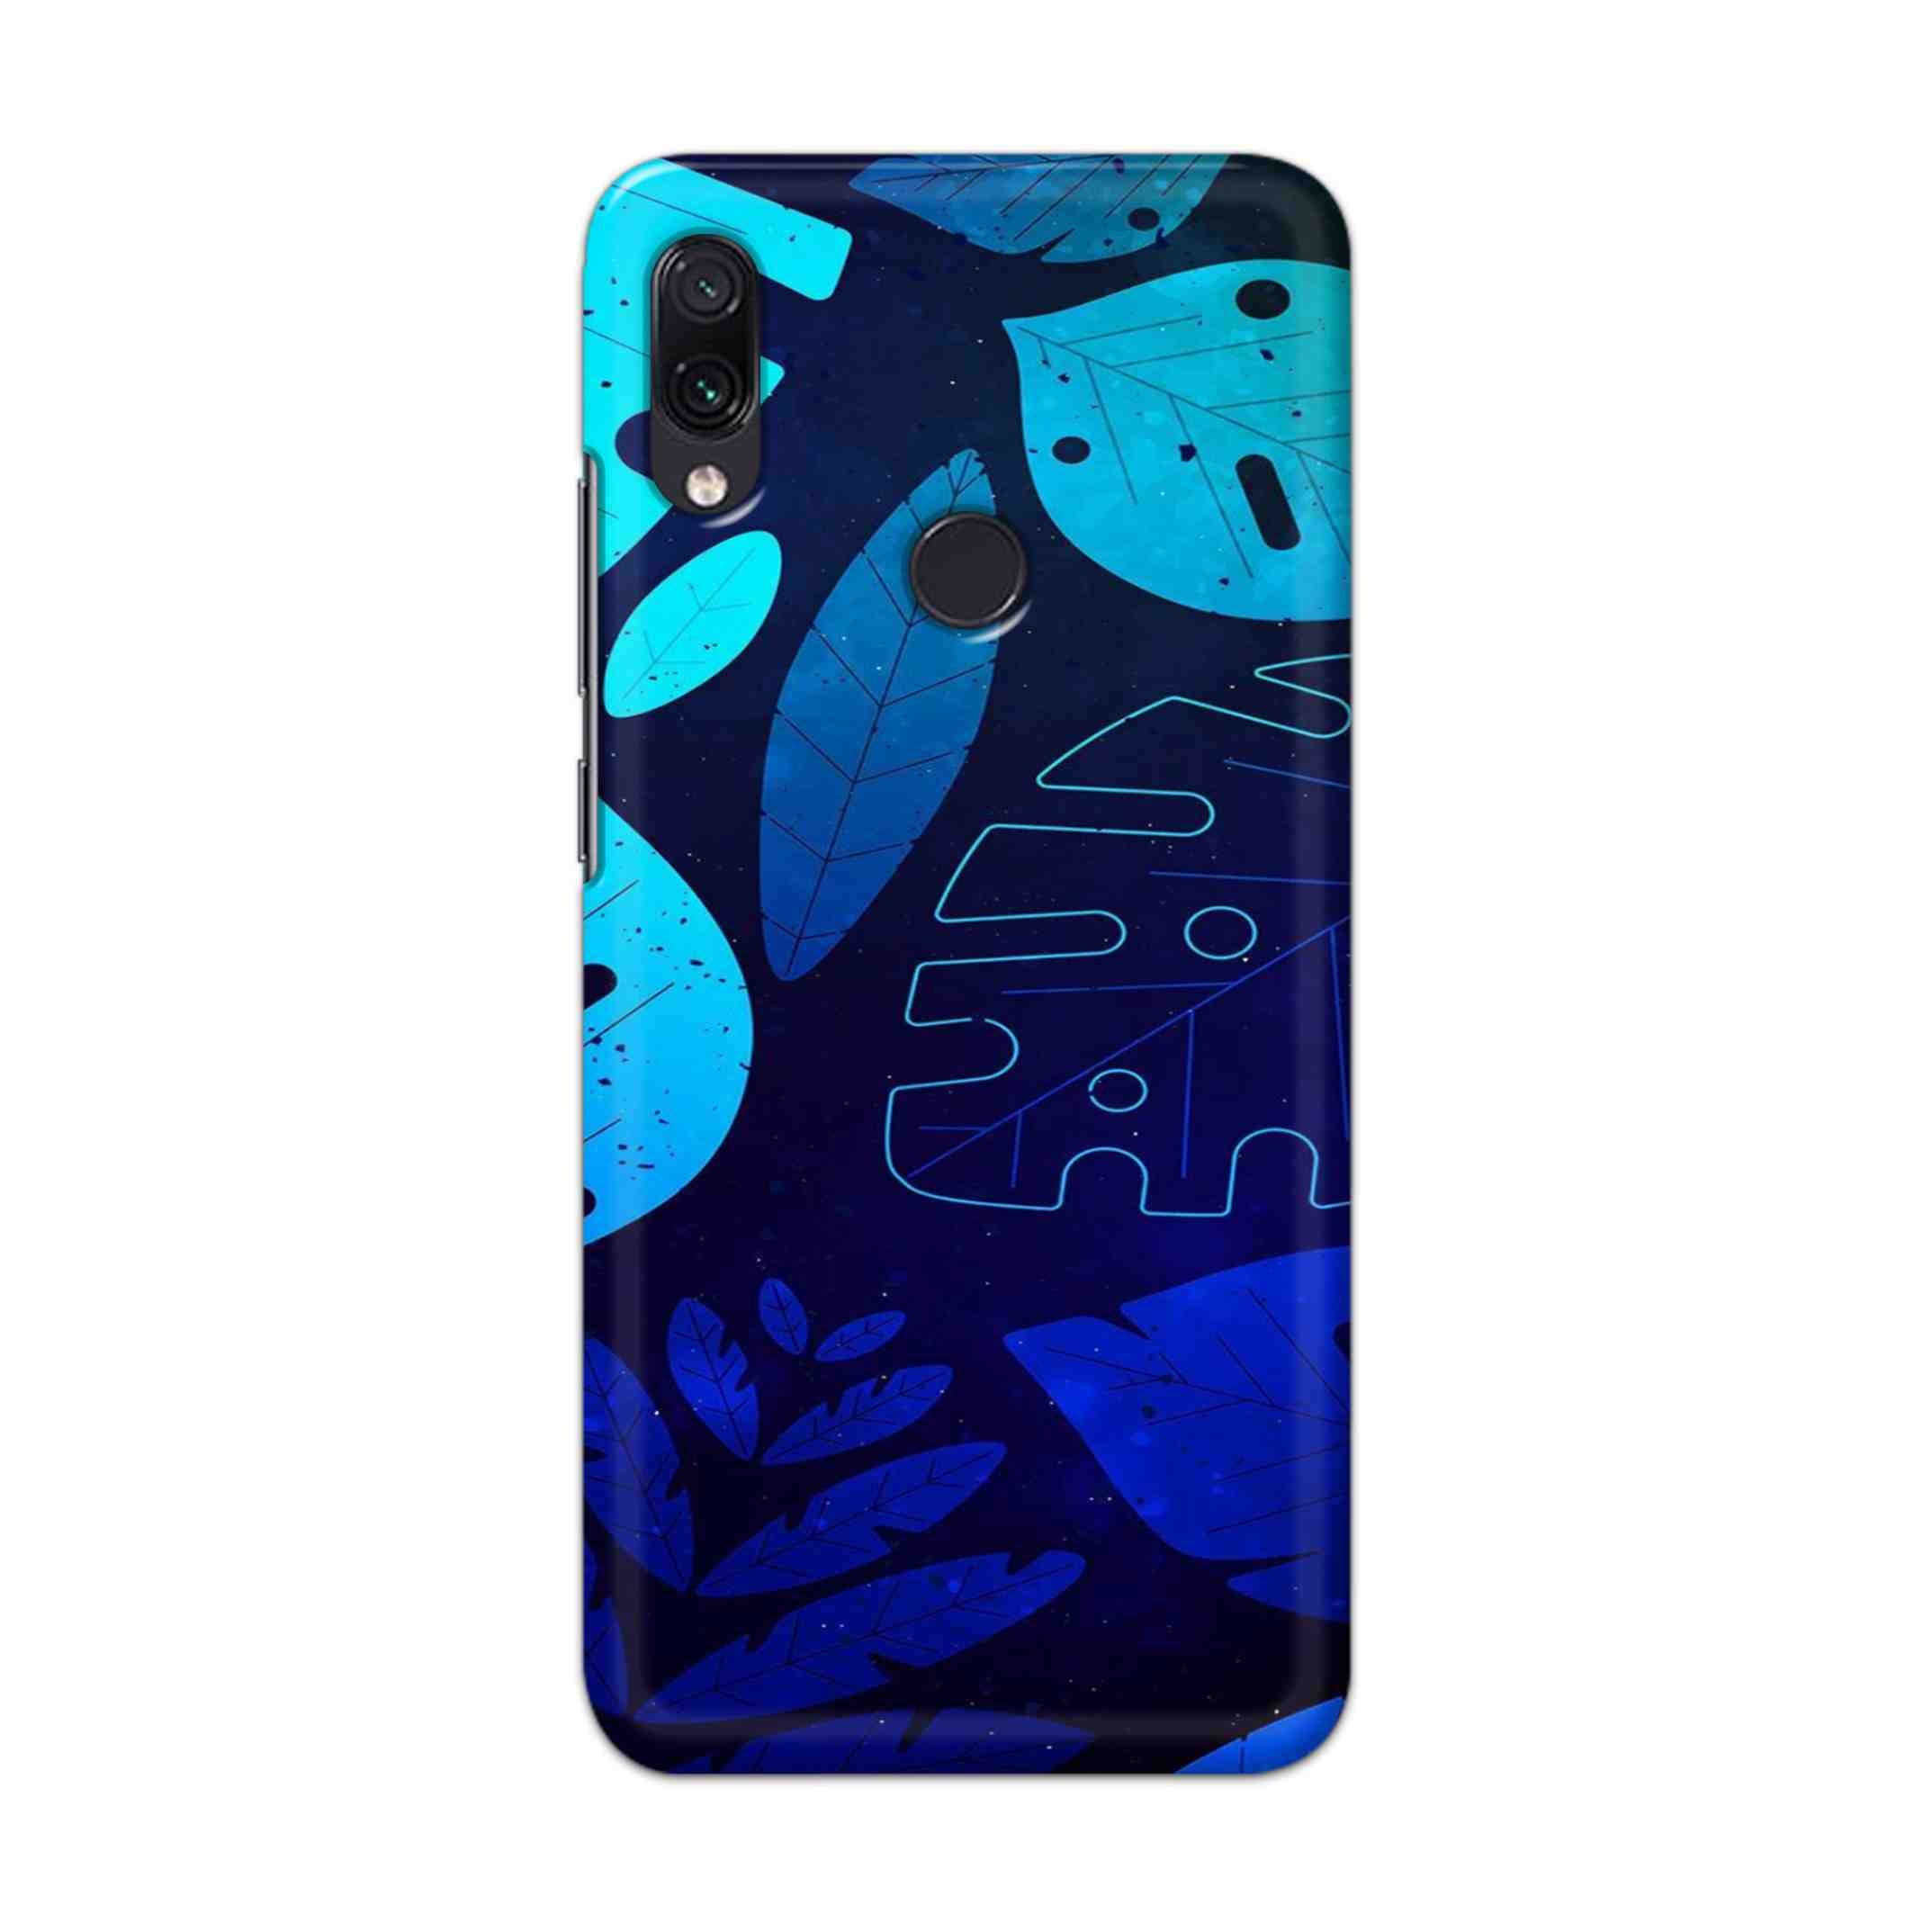 Buy Neon Leaf Hard Back Mobile Phone Case Cover For Xiaomi Redmi 7 Online